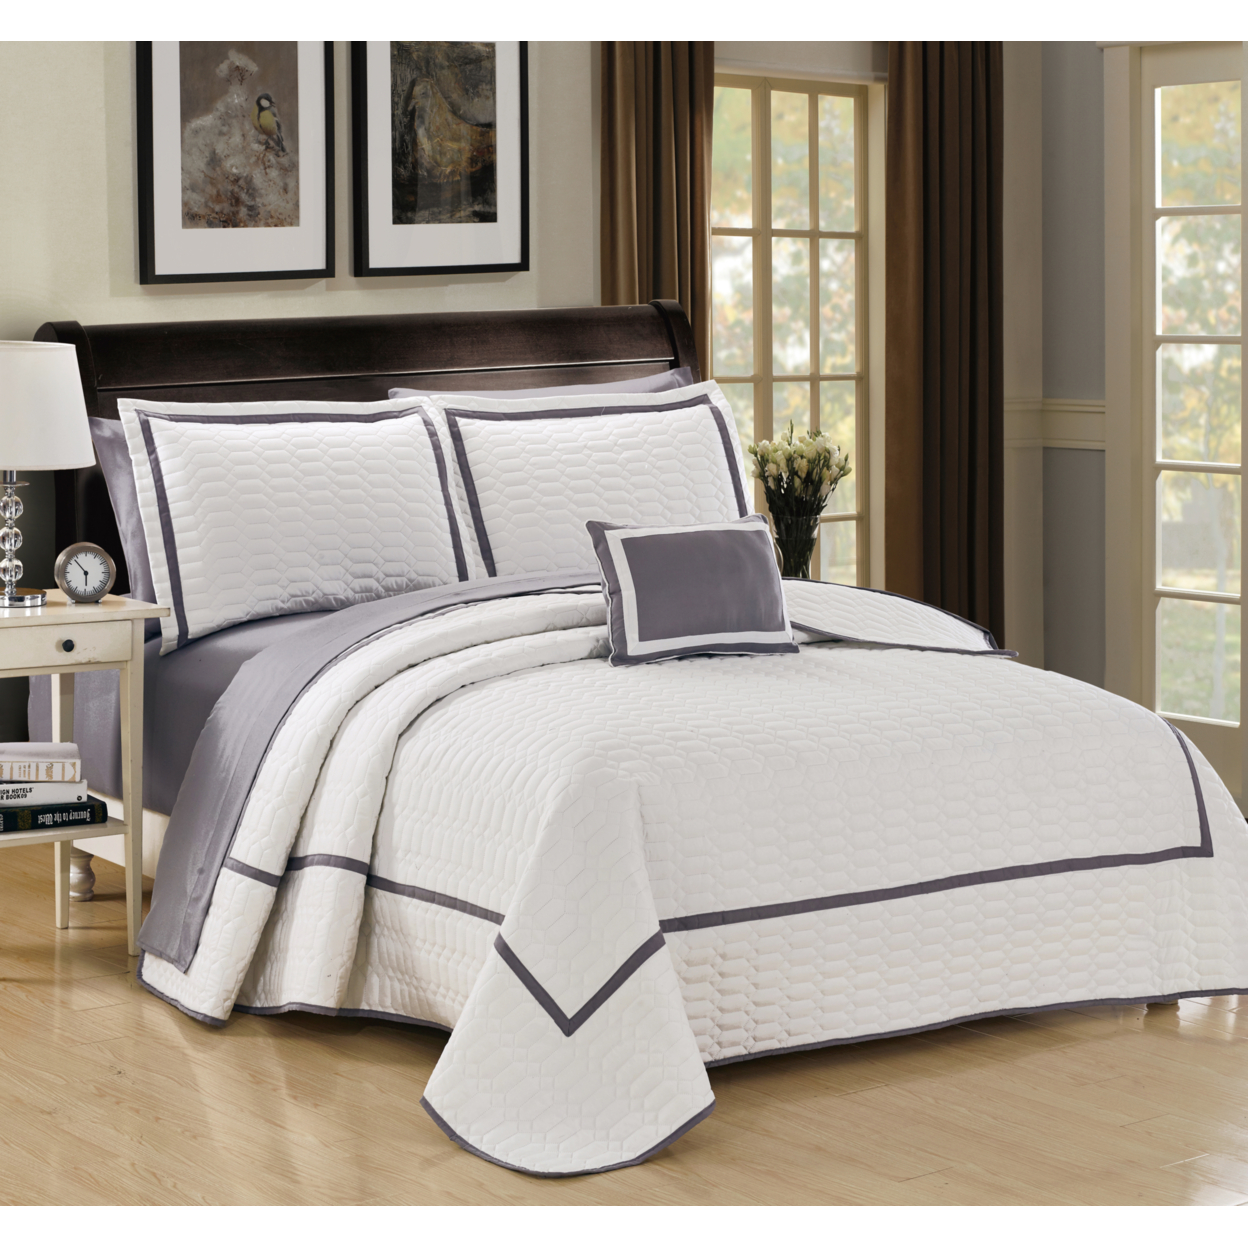 8 Pc. Neal Hotel Collection 2 Tone Banded Geometrical Embroidered, Quilt In A Bag, Includes Sheets Set, Shams & Decorative Pillows - Grey, K